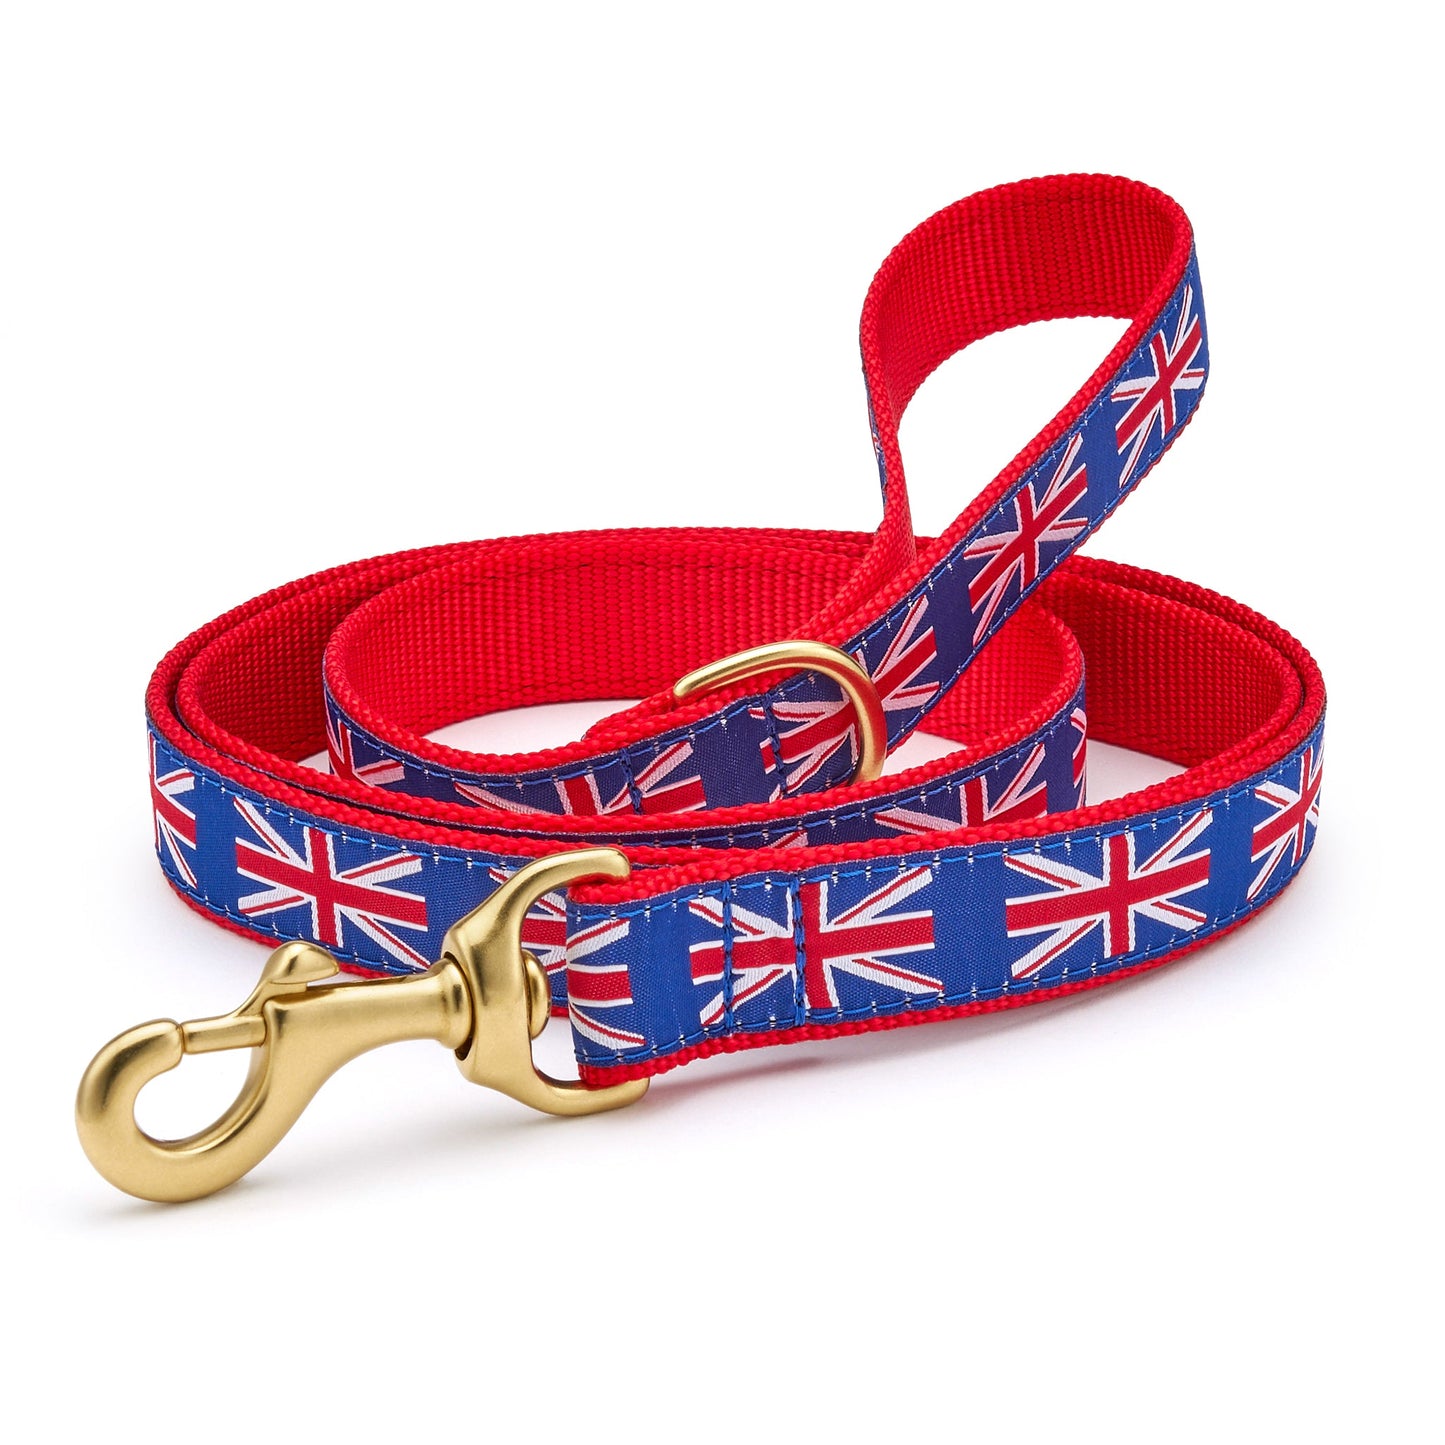 Union Jack Dog Lead by Up Country